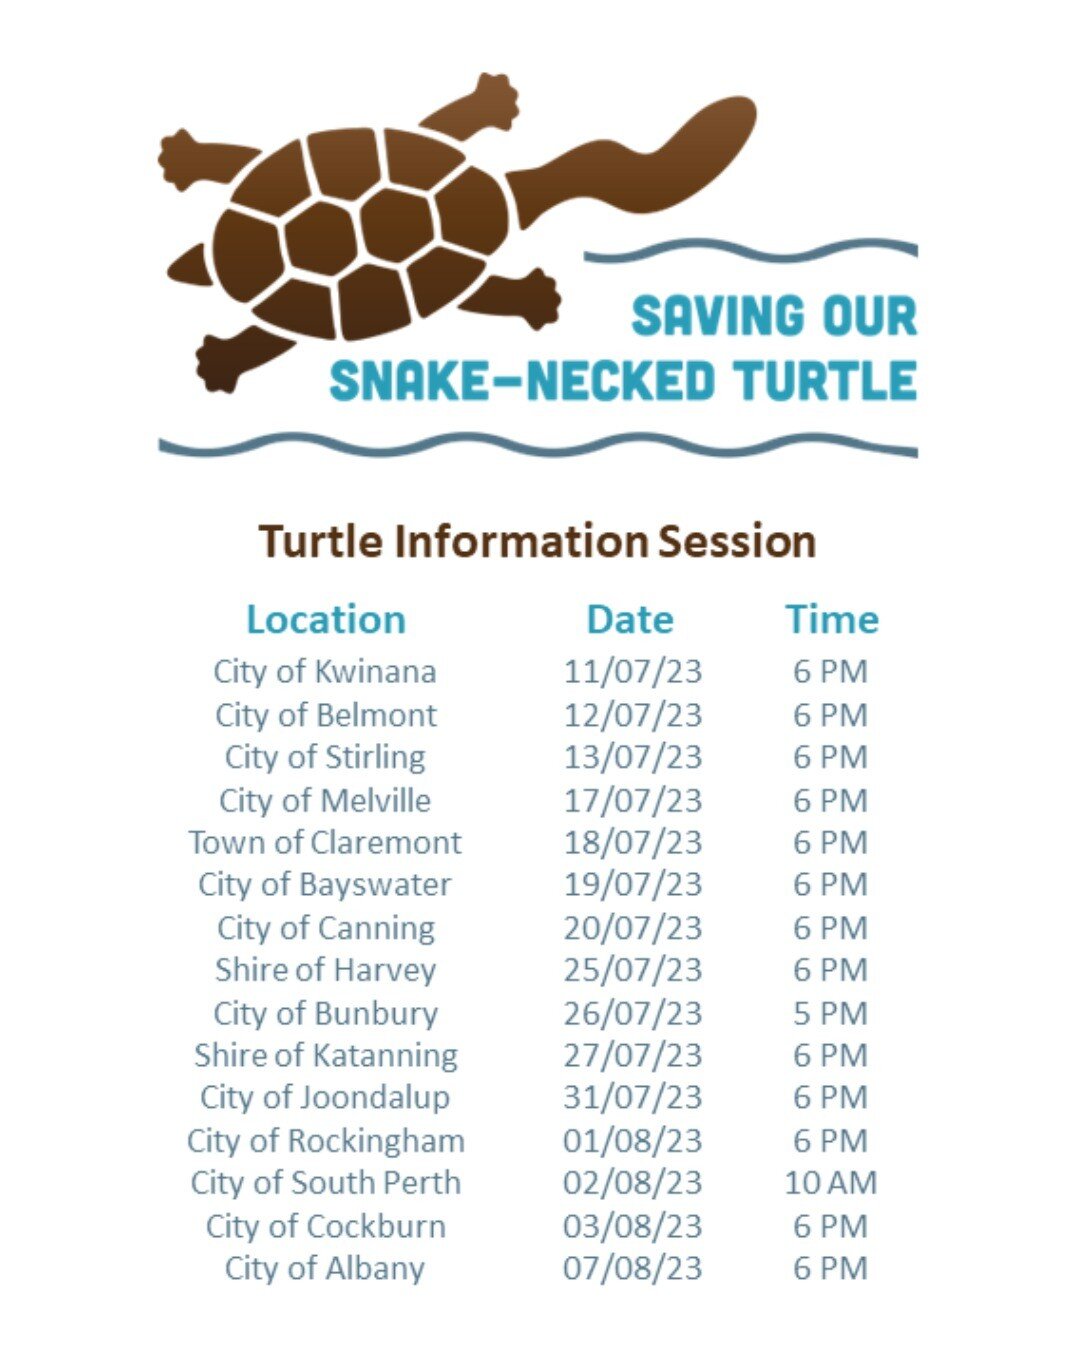 Want to learn all about the snake-necked turtle, the latest research, and the threats to turtle populations?

Come along to one of our Turtle Information Sessions at your local council.

At the session you will learn how you can contribute to crucial